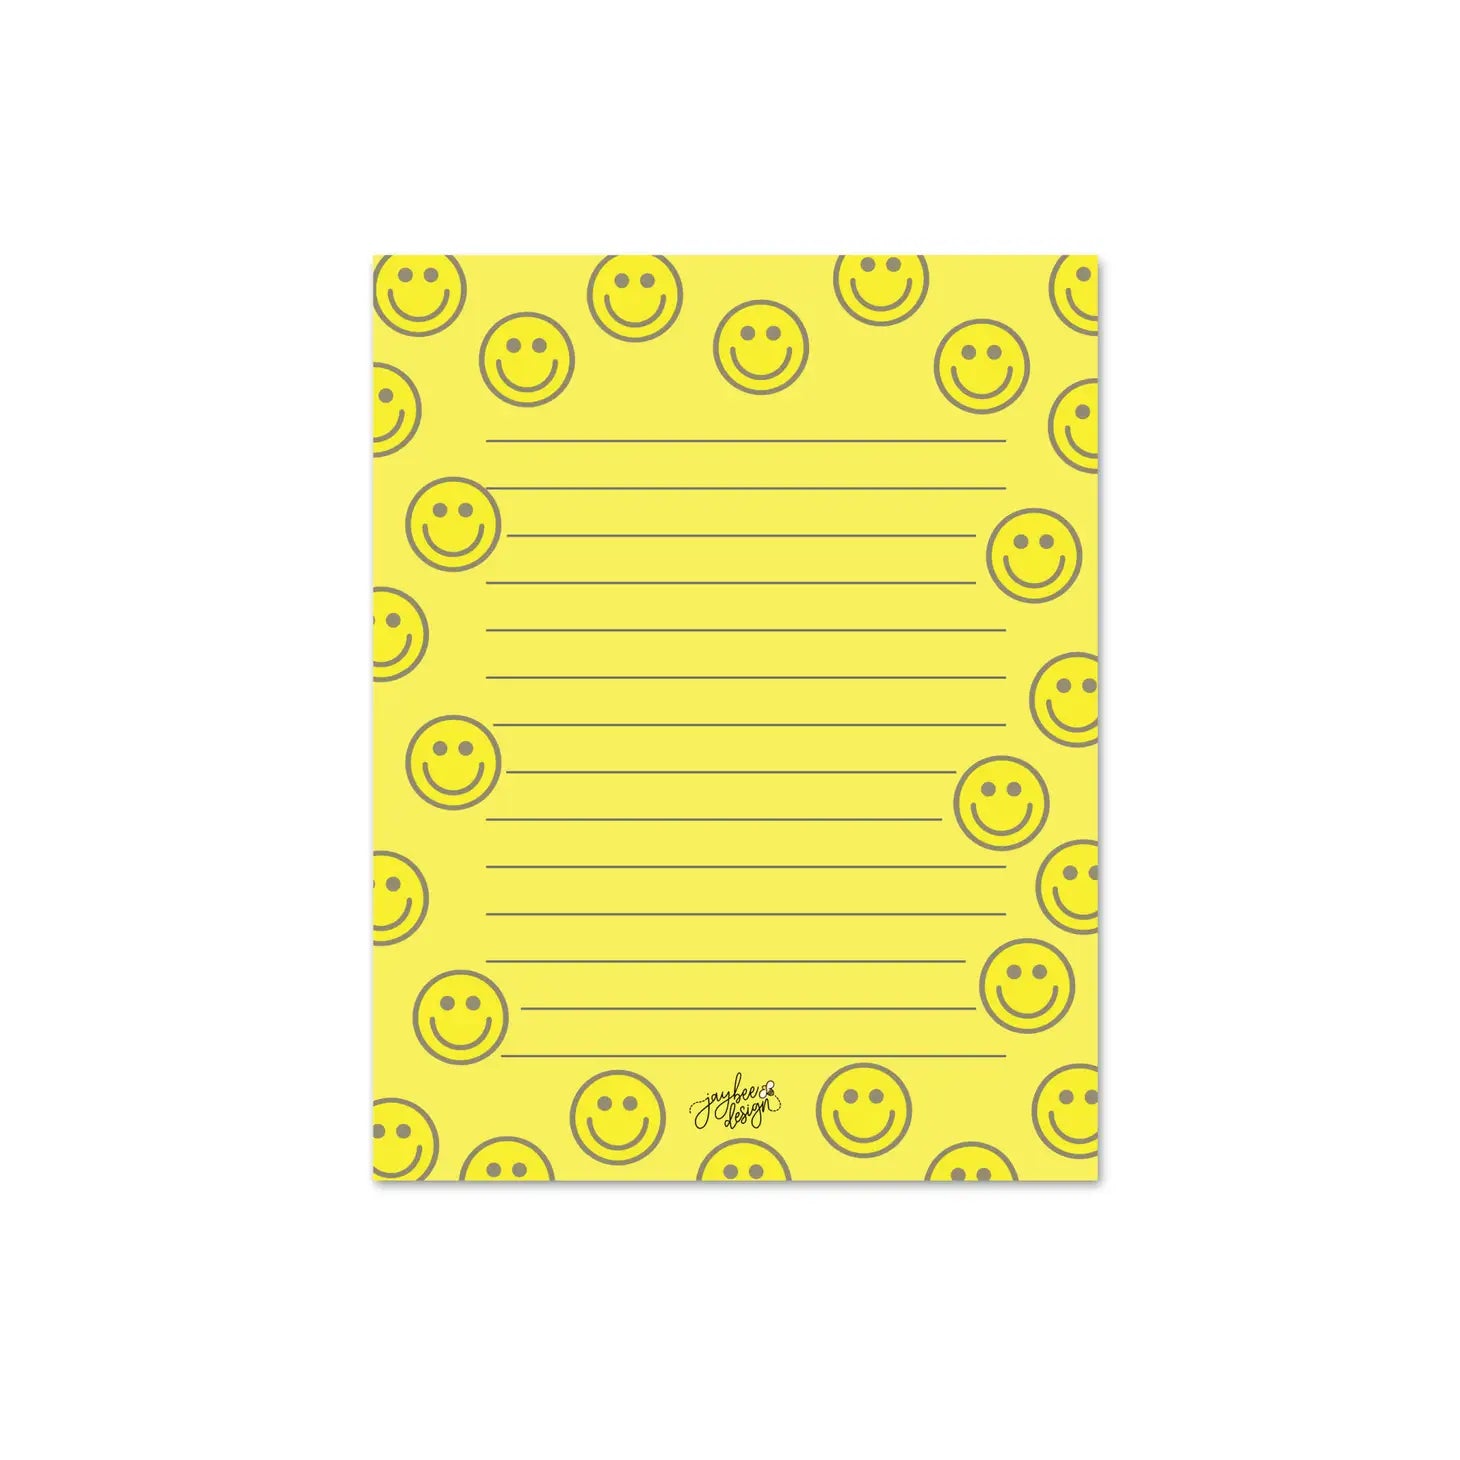 All Smiles Notepad - 25 pgs